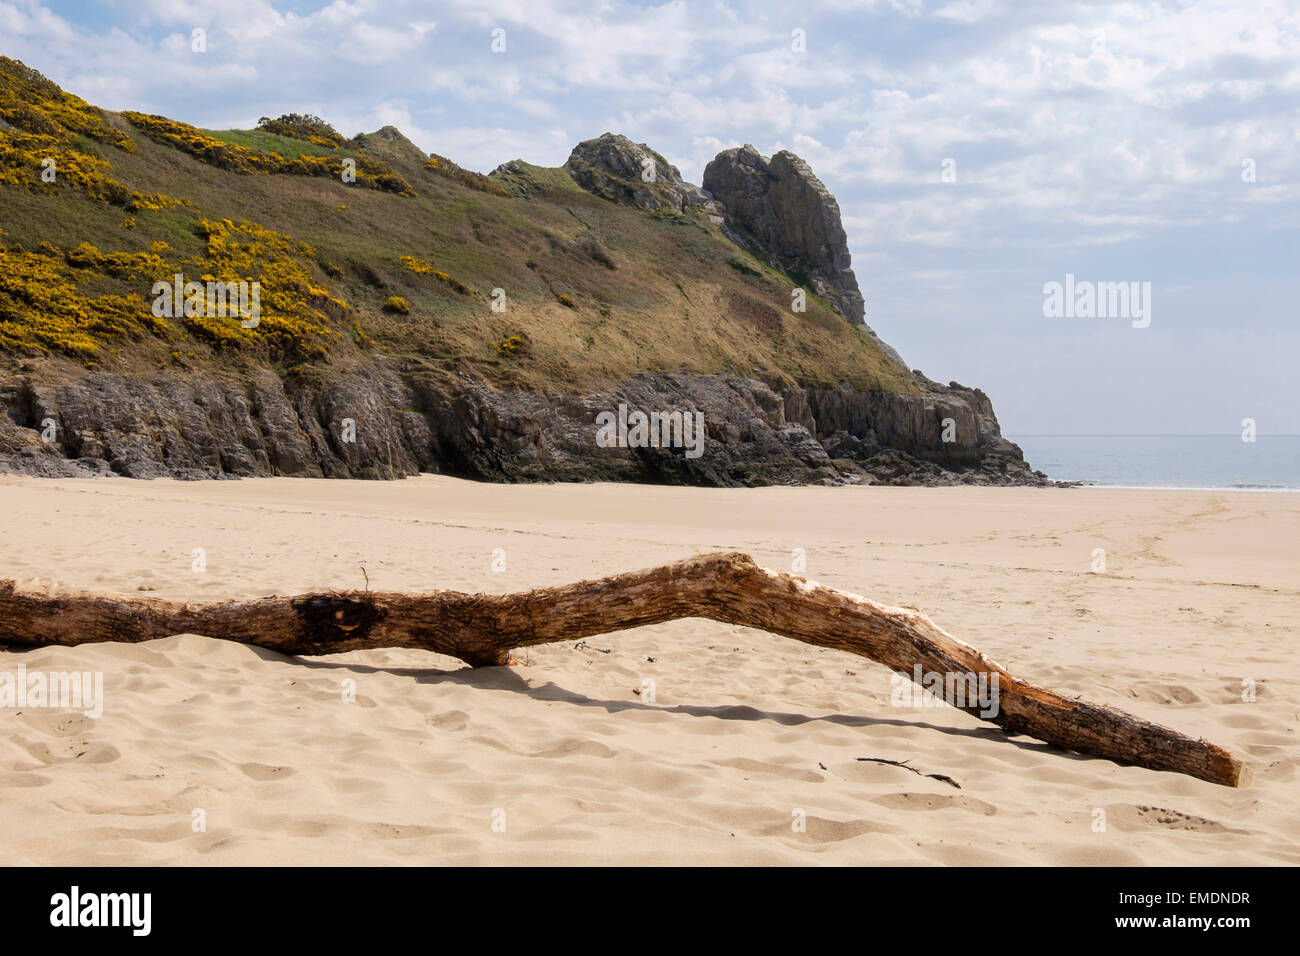 Driftwood log on Tor Bay sandy beach with Great Tor rocky headland in Oxwich Bay on Gower Peninsula Swansea South Wales UK Stock Photo